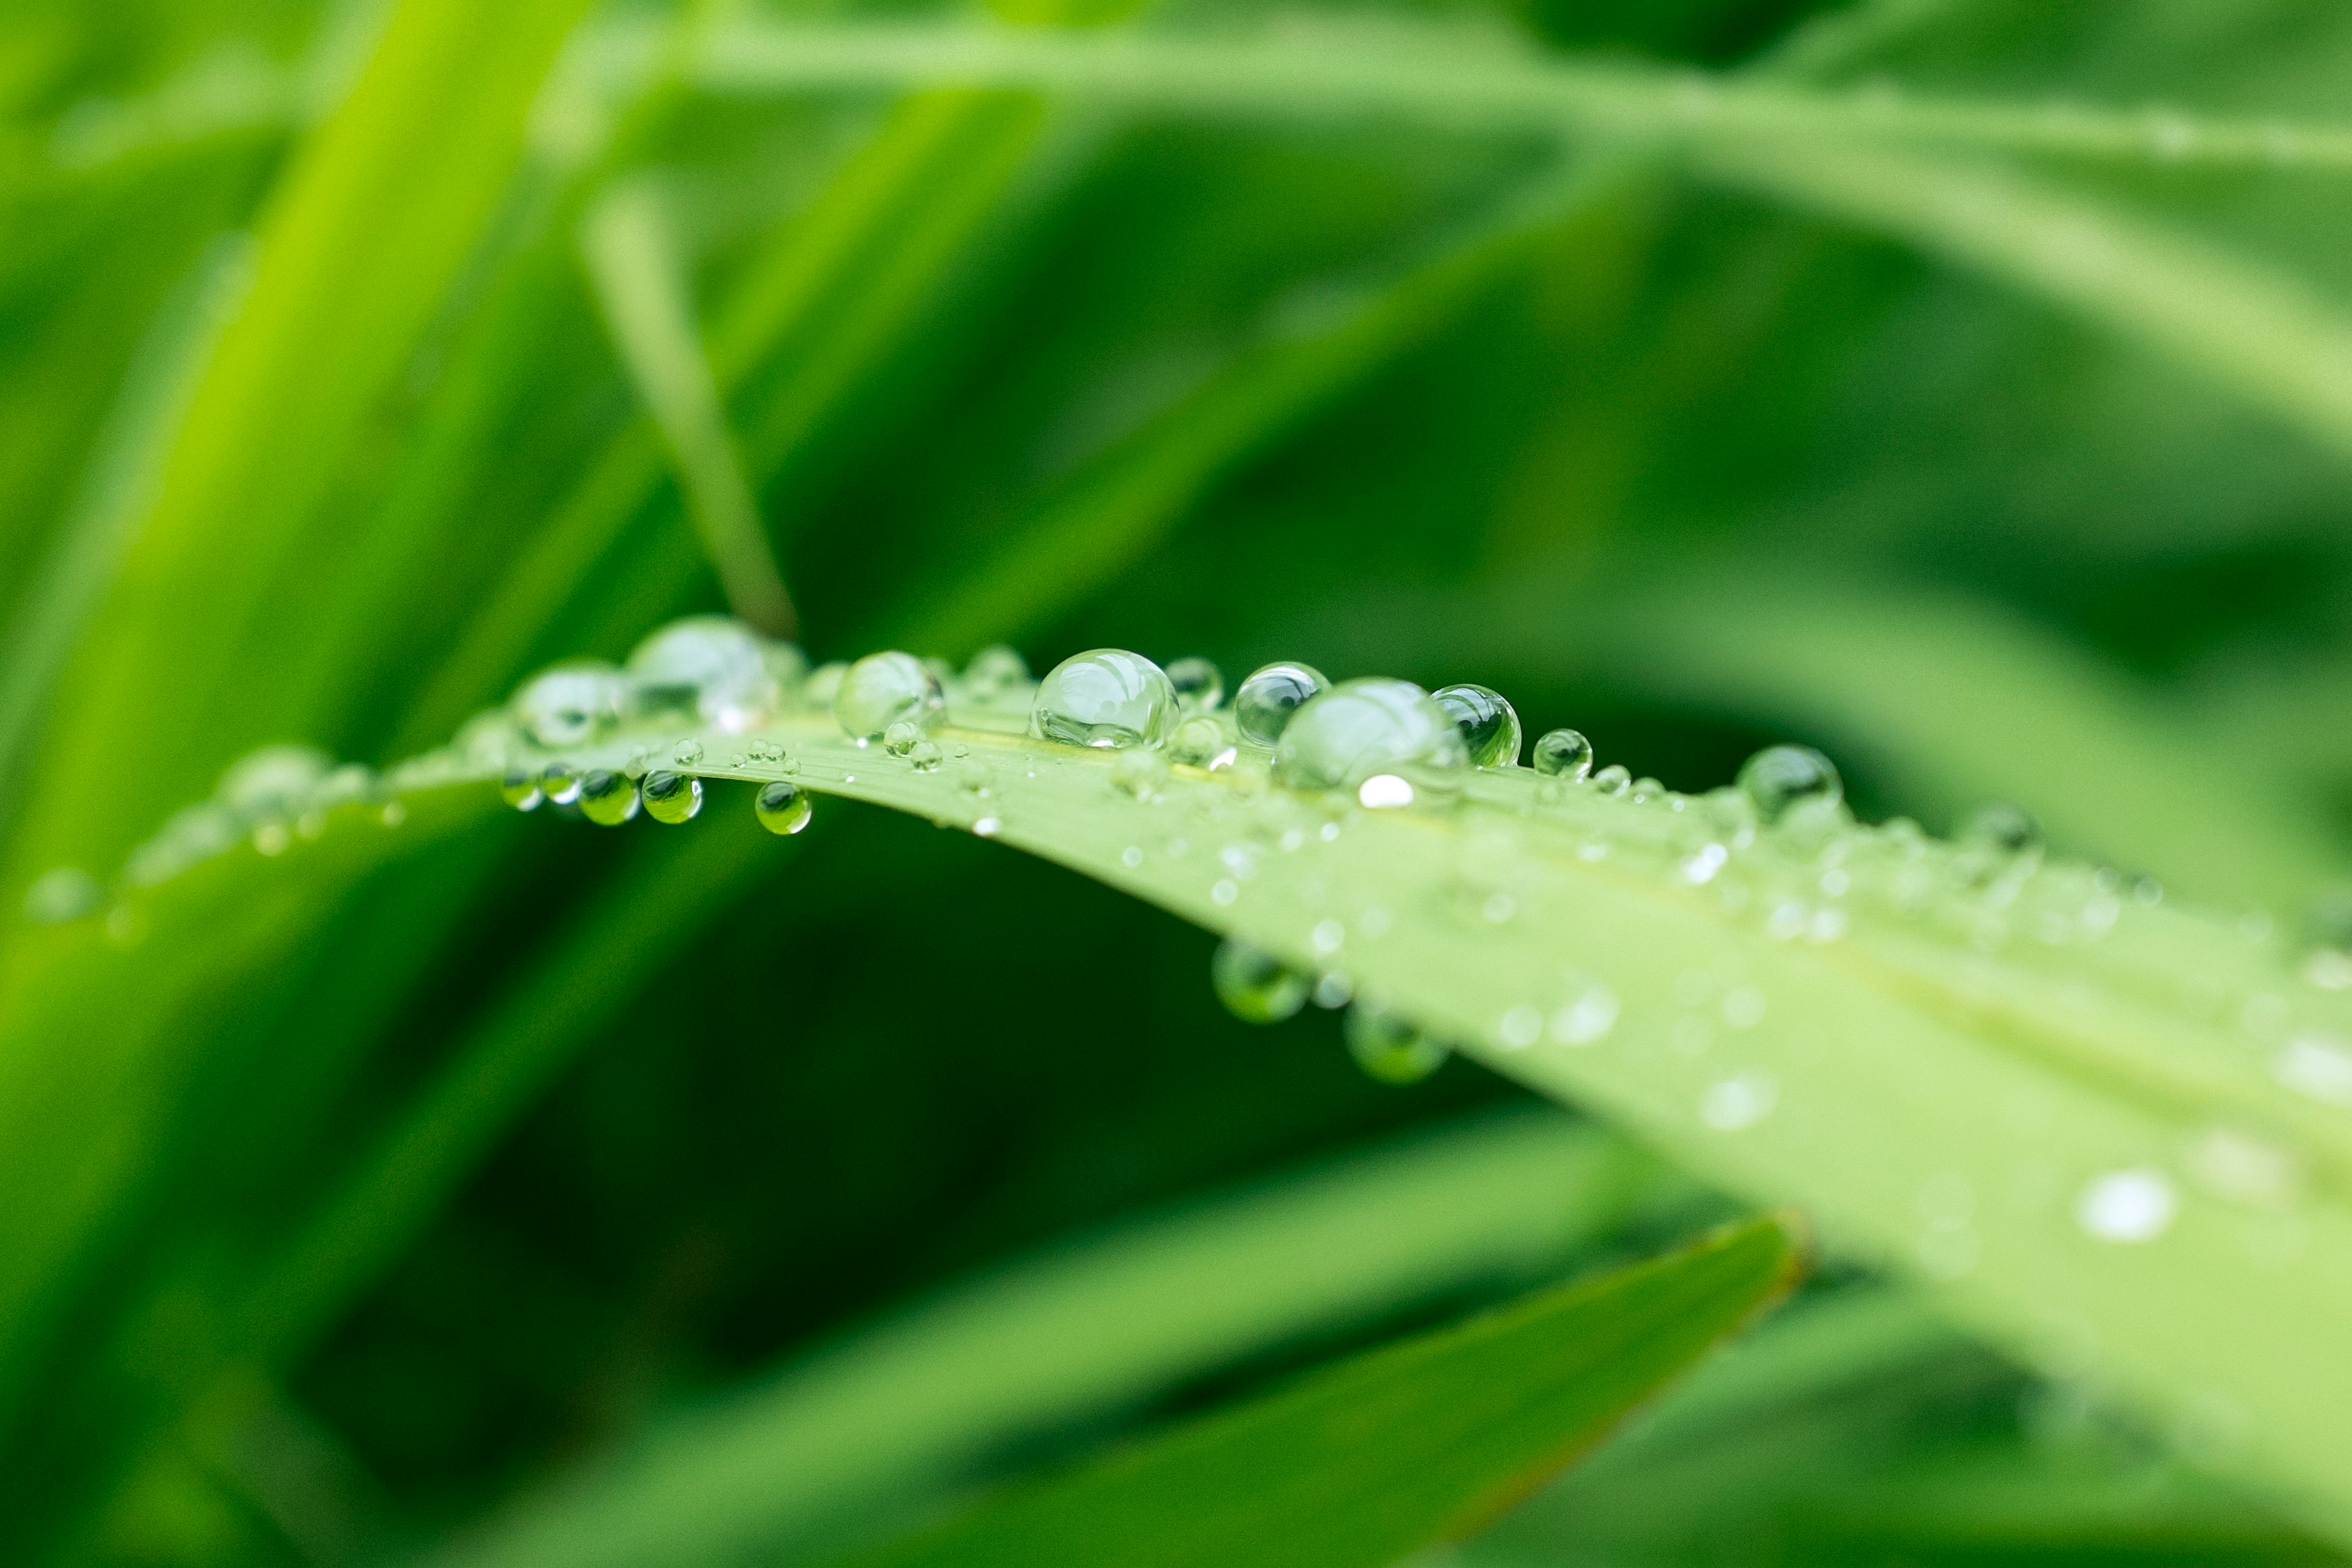 macro shot of water droplets on green grass